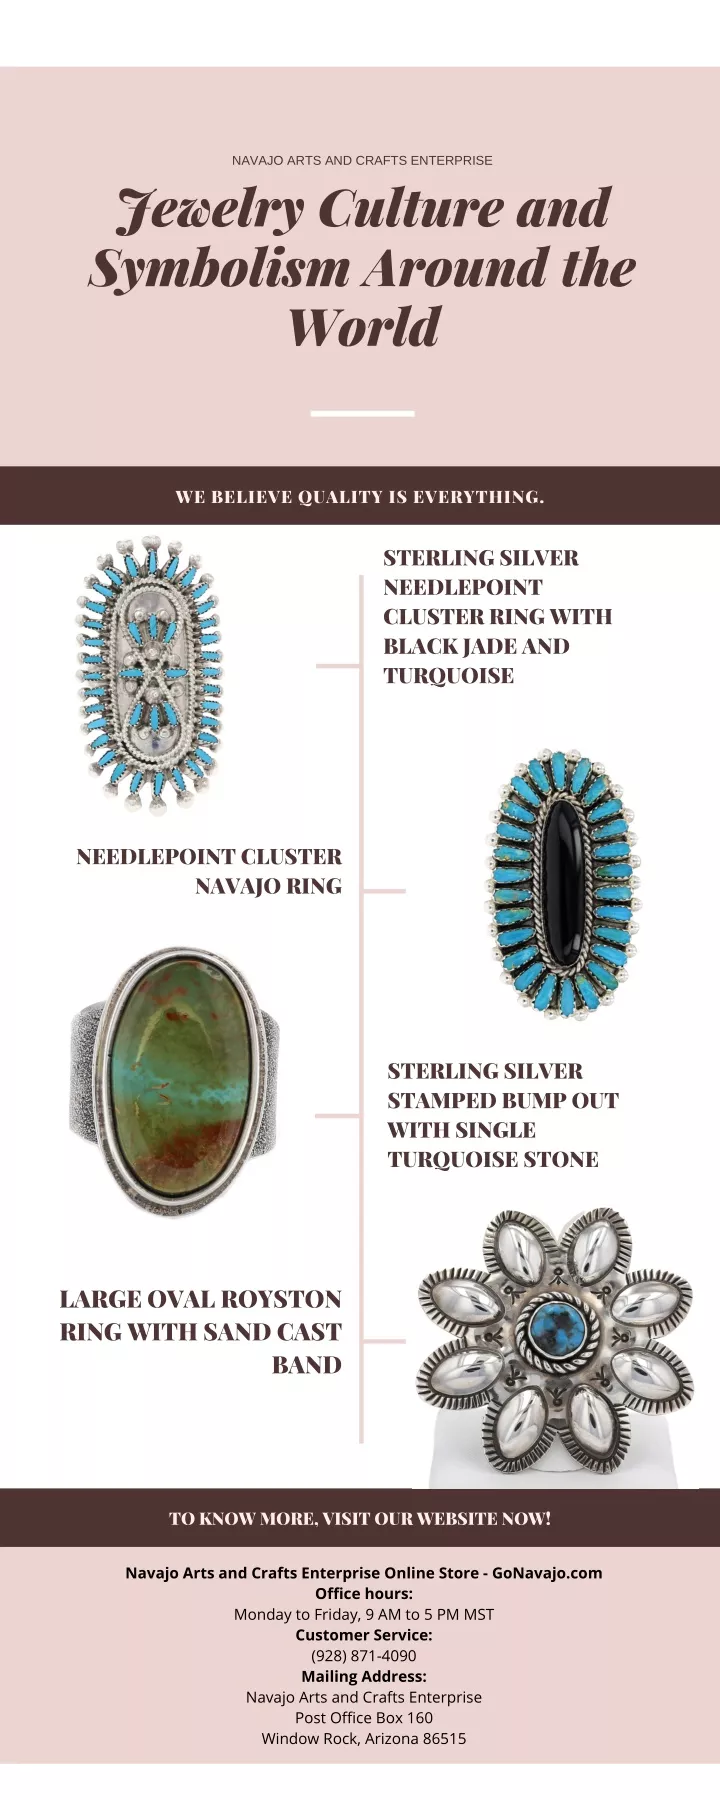 navajo arts and crafts enterprise jewelry culture